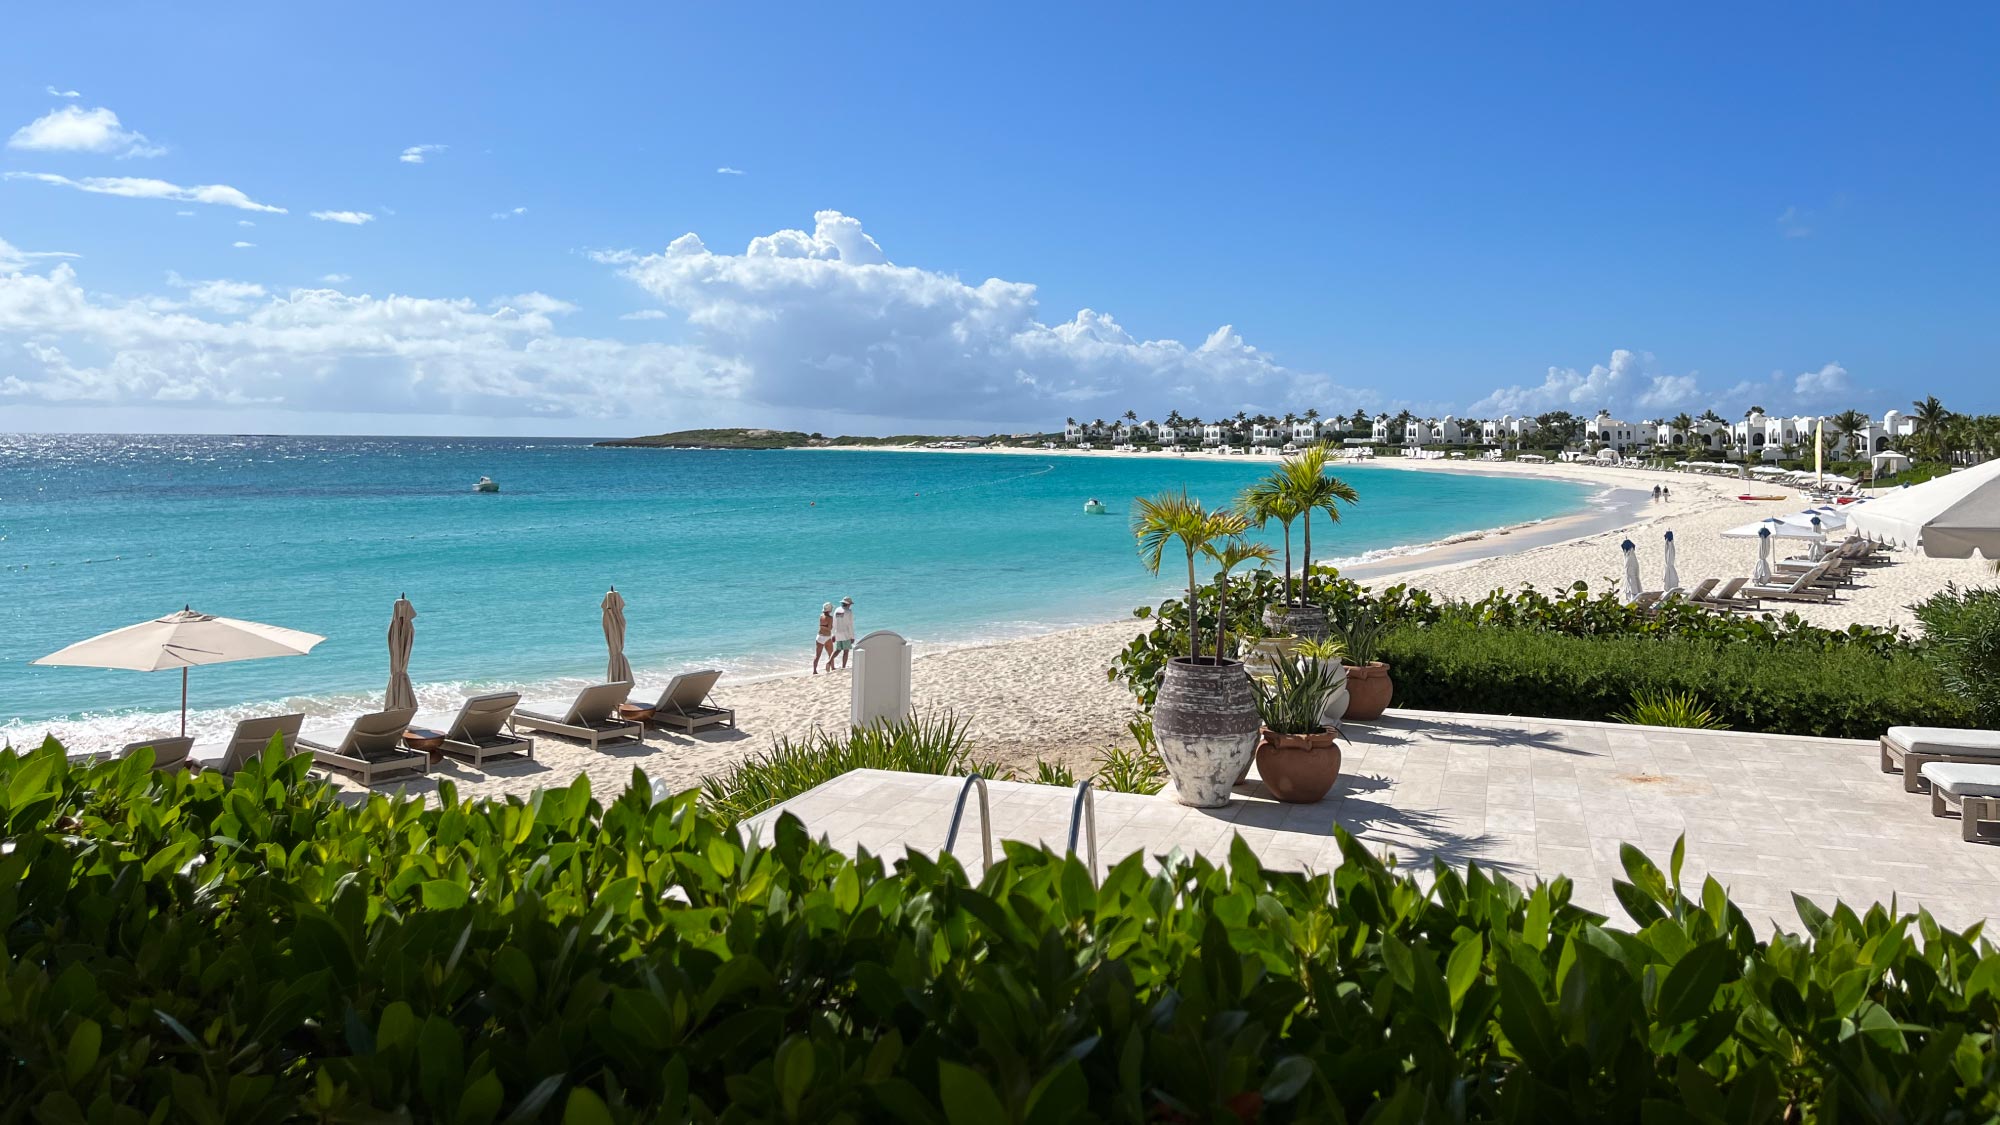 A captivating view of Belmond Cap Juluca in The Valley, Anguilla, featuring luxurious beachfront villas and turquoise waters stretching to the horizon. Tailored for self-flying pilots planning a caribbean adventure